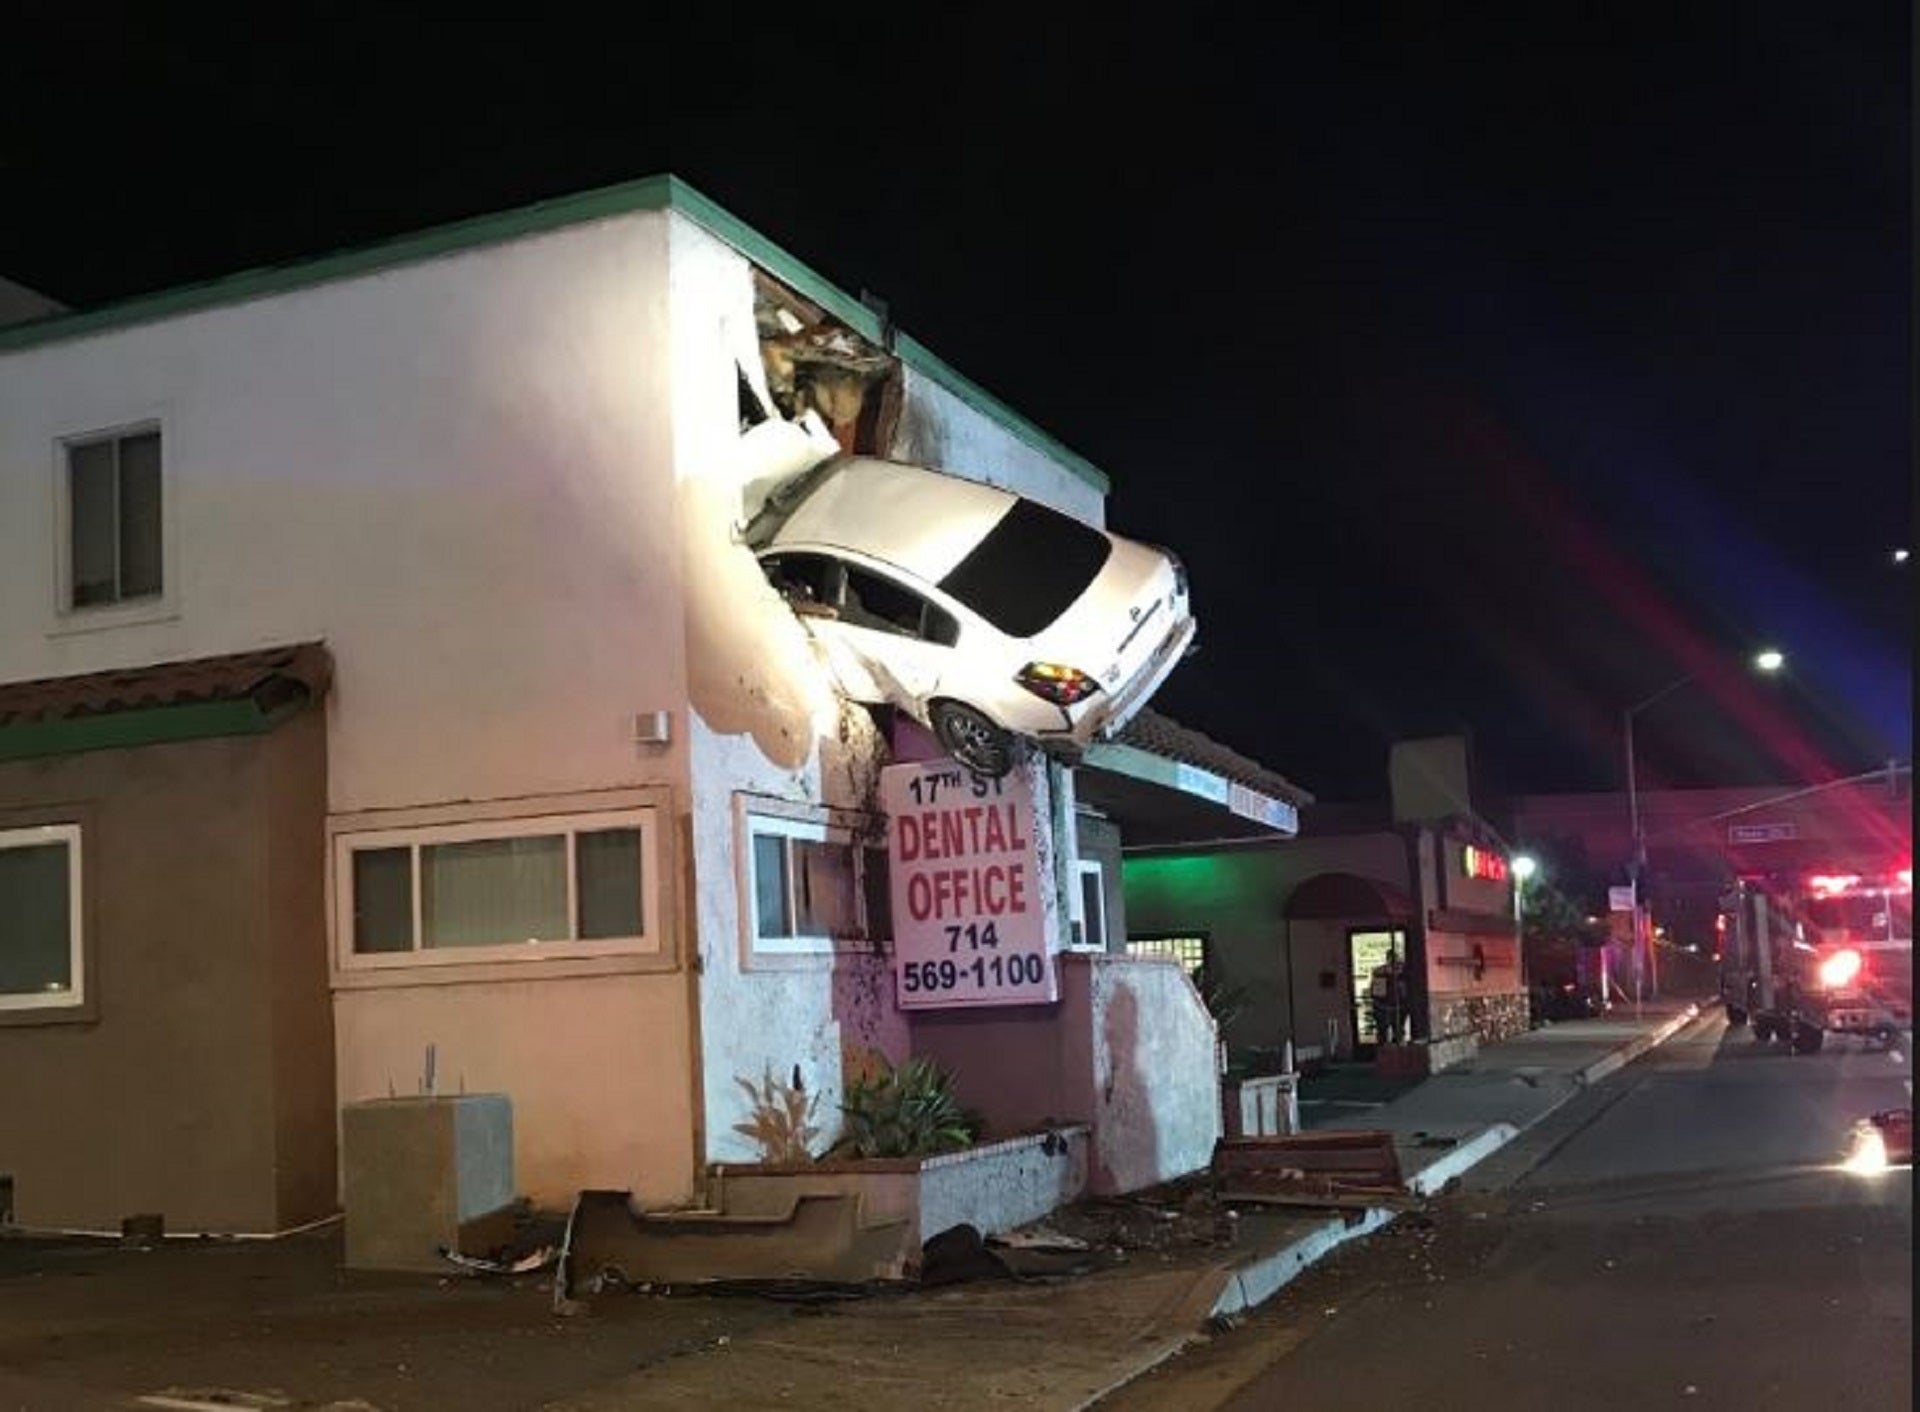 Somehow This Guy Crashed Into the 2nd Floor of a Building